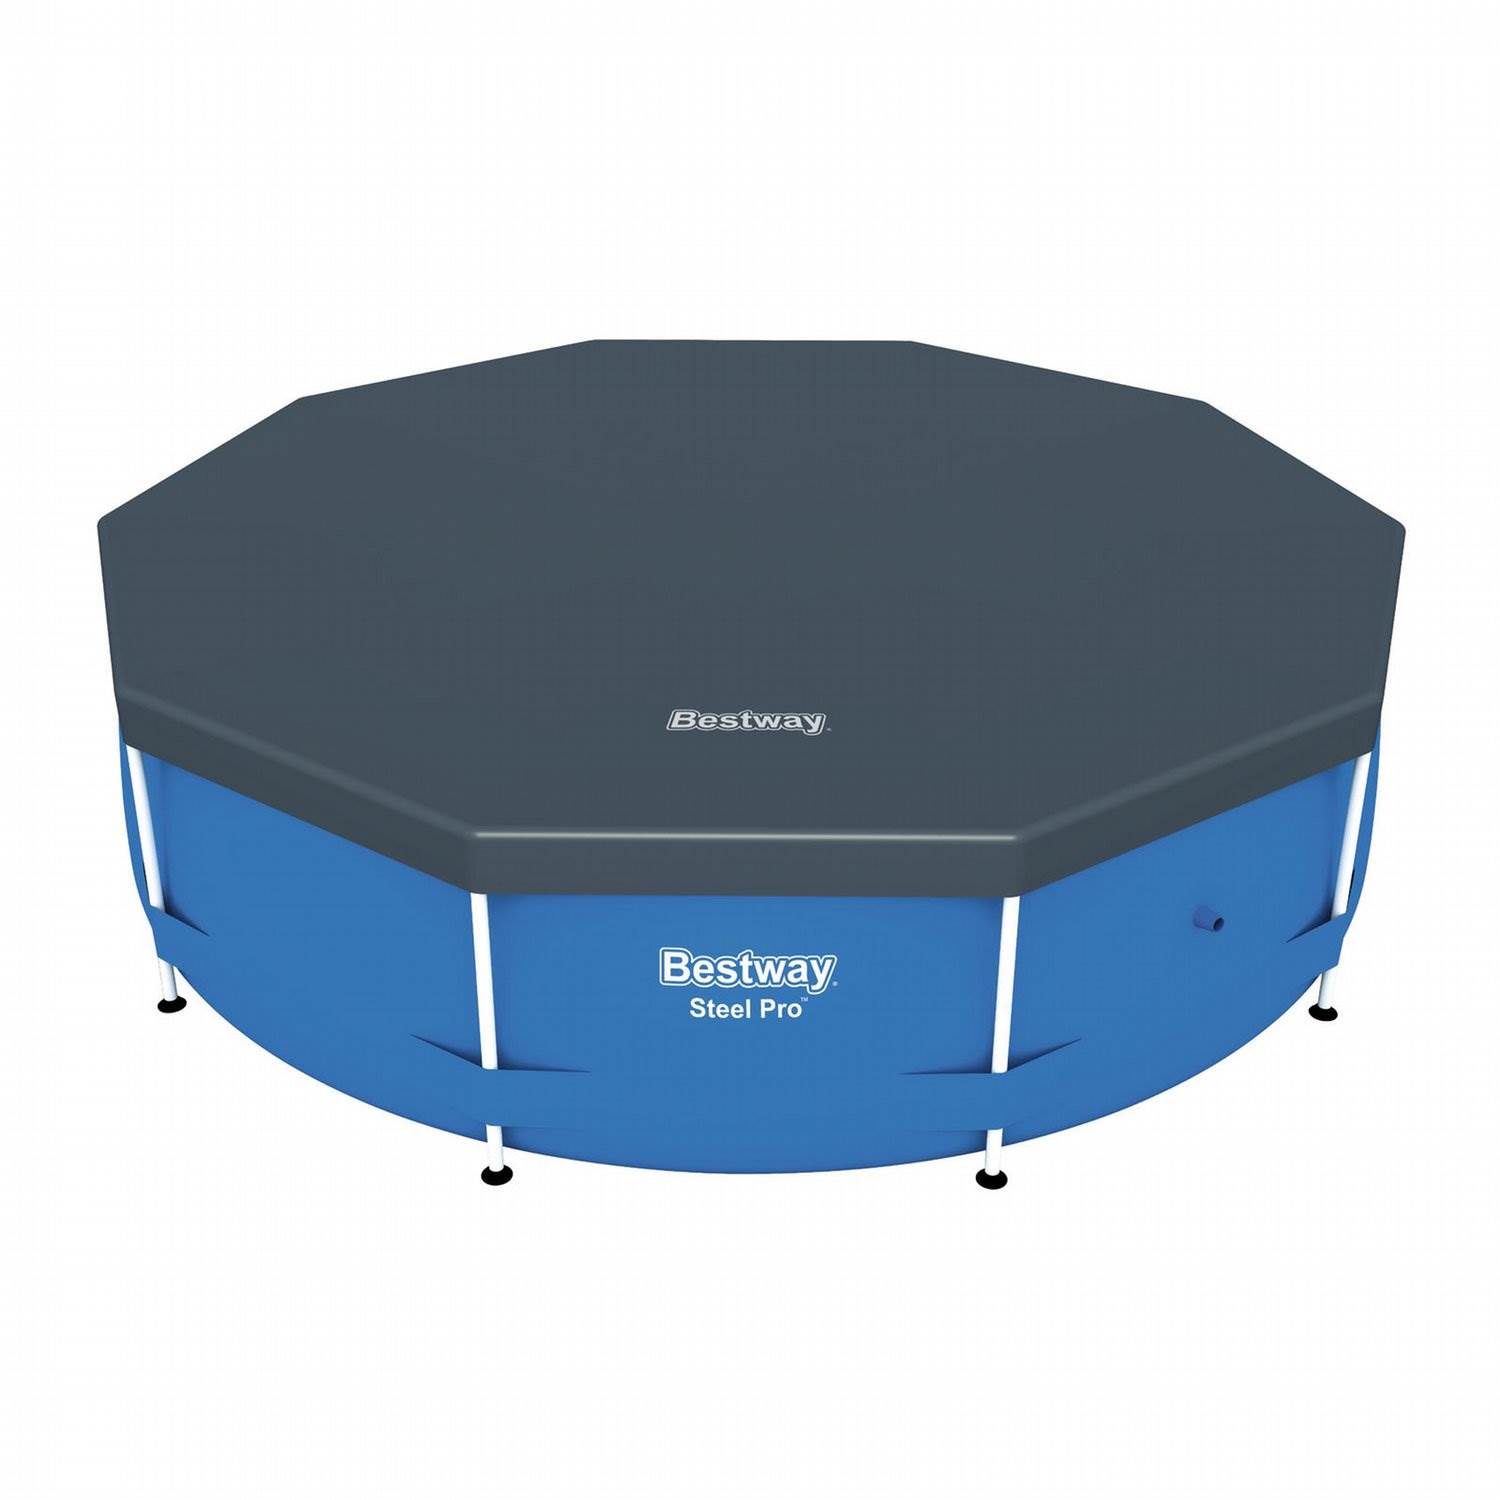 Bestway Round PVC 10 Foot Pool Cover for Above Ground Pro Frame Pools (Used) eBay